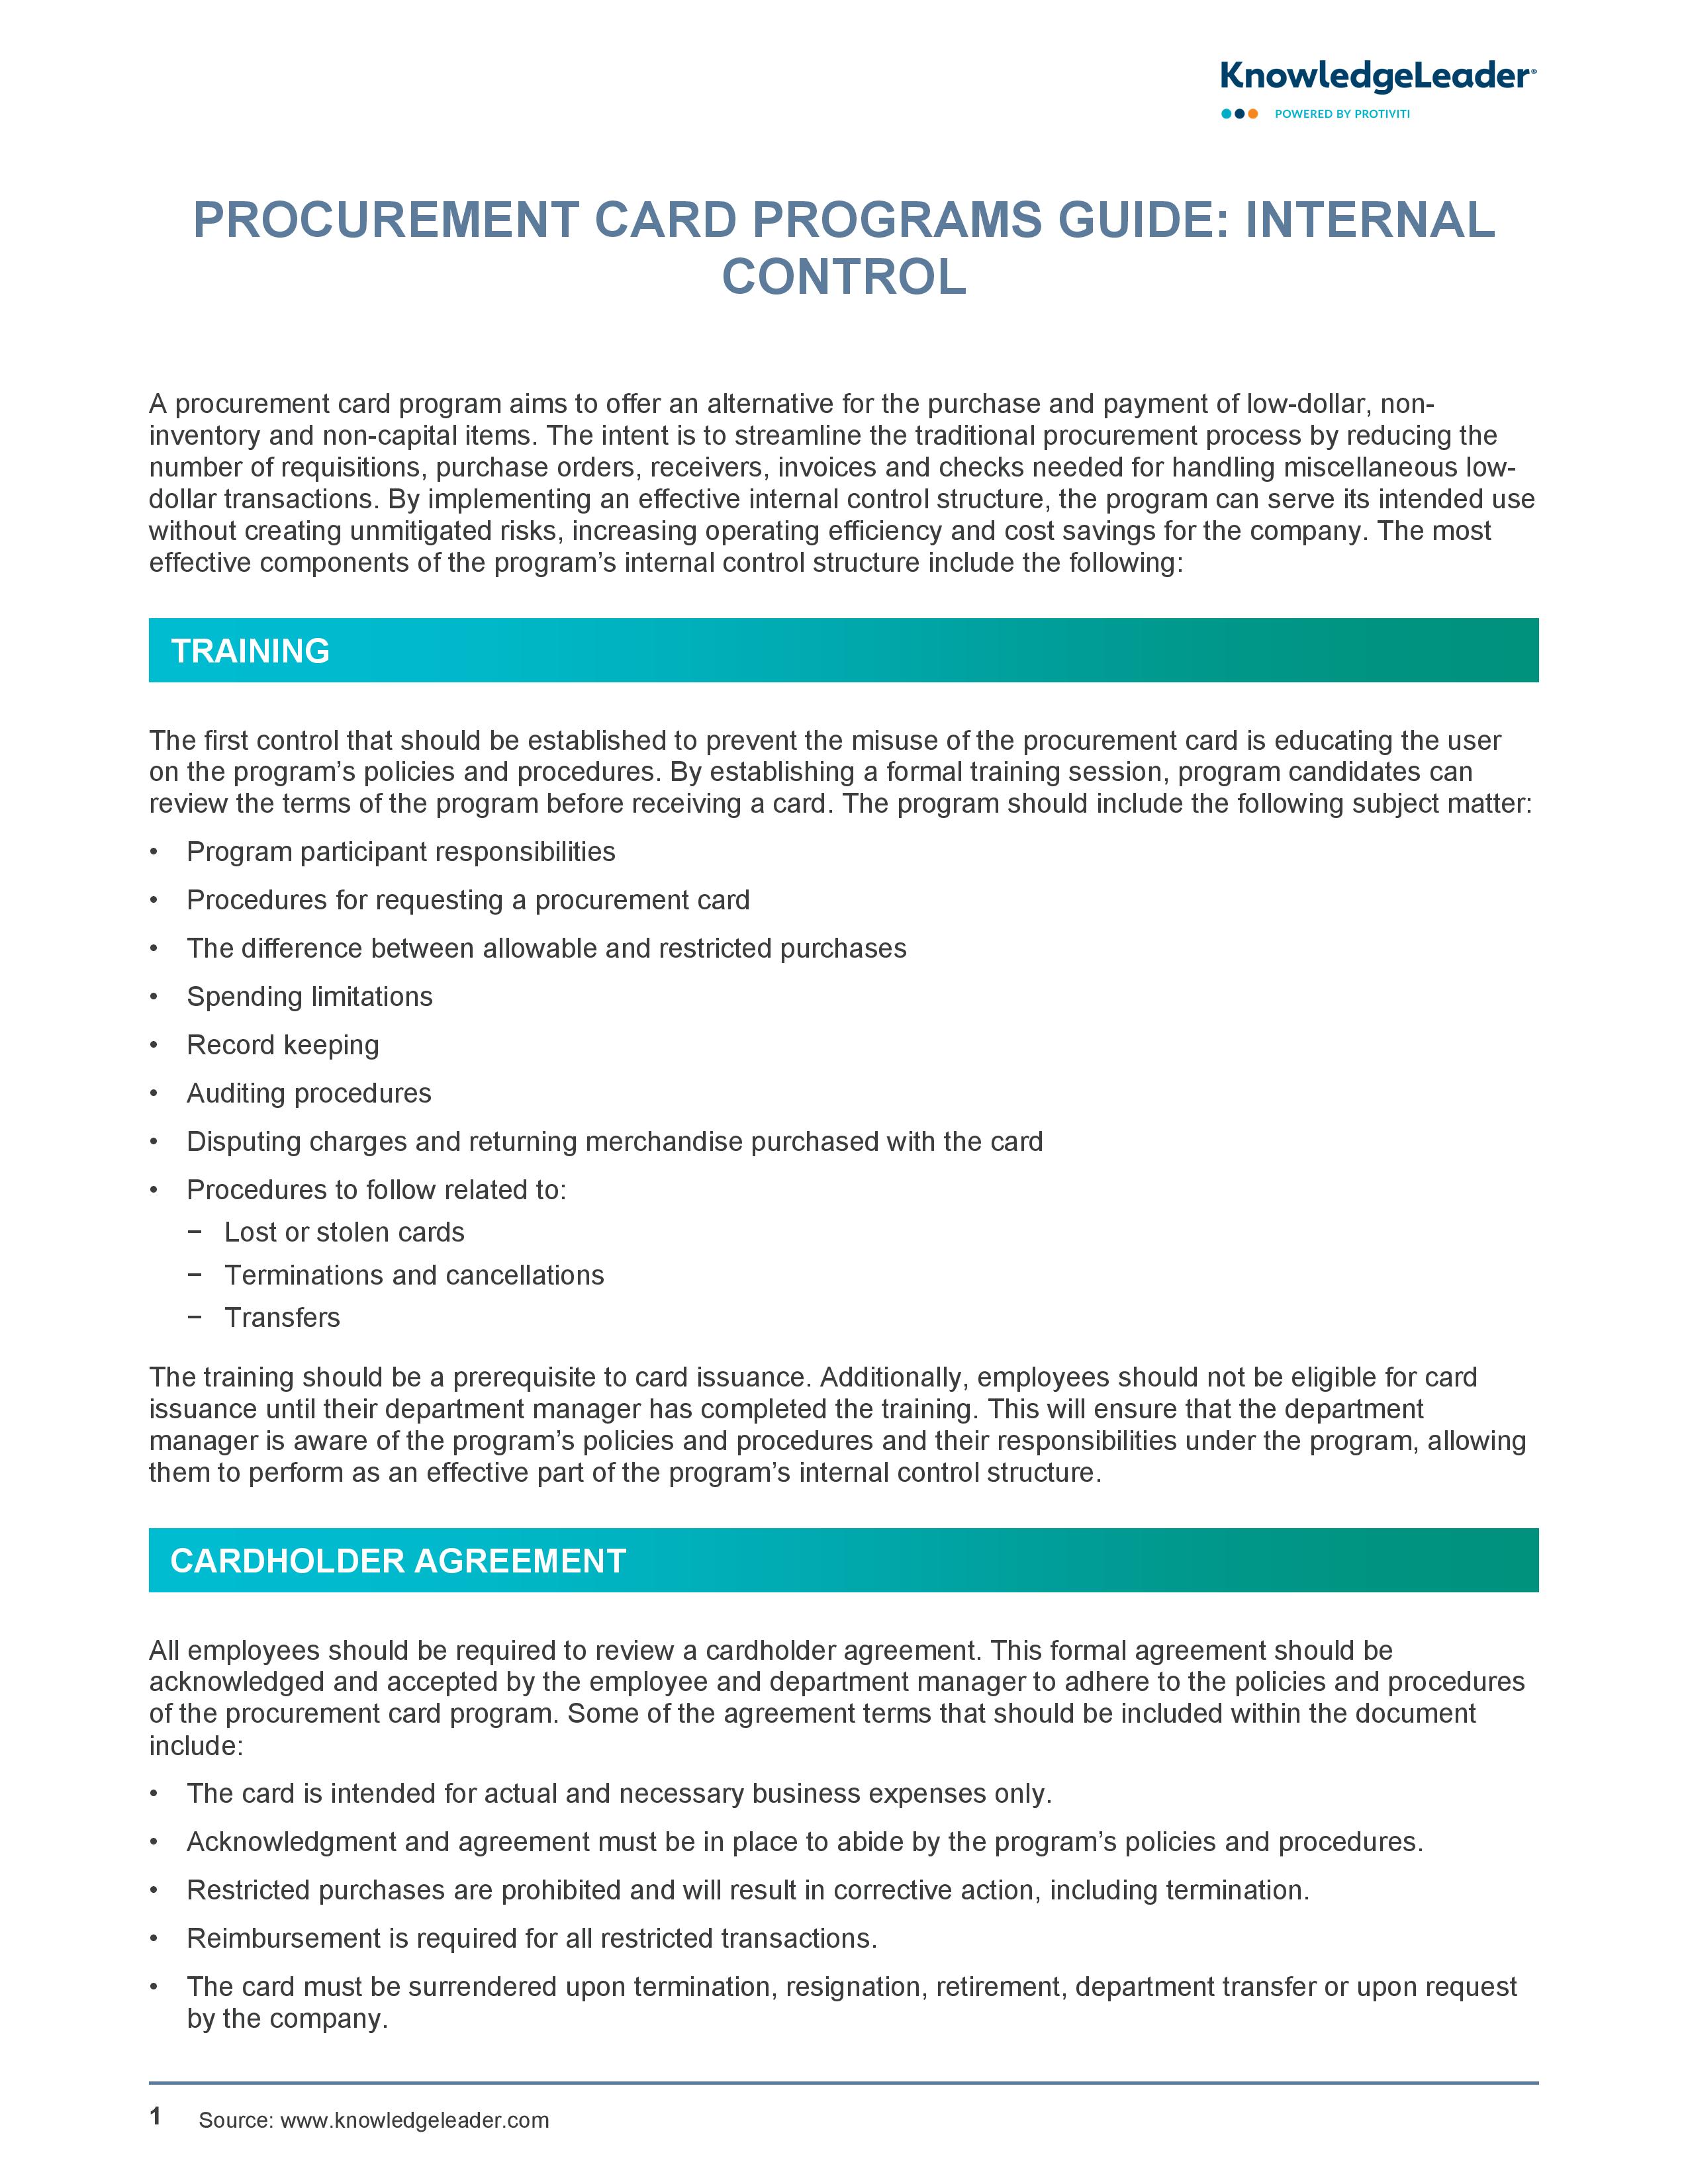 screenshot of the first page of Procurement Card Programs Guide Internal Control